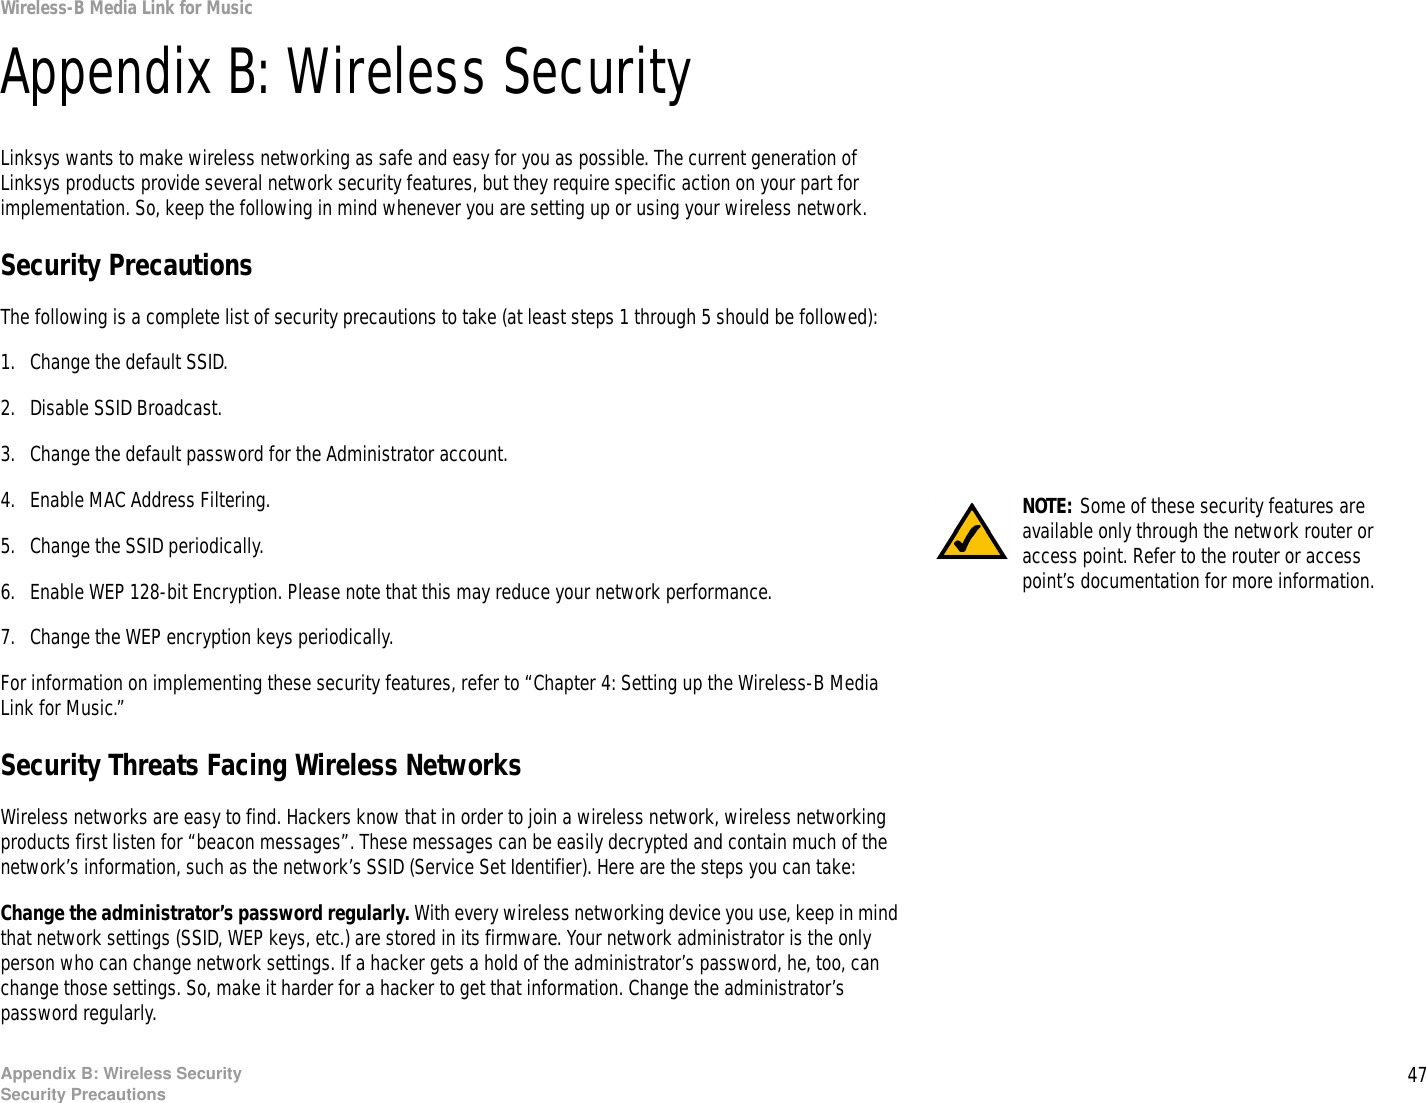 47Appendix B: Wireless SecuritySecurity PrecautionsWireless-B Media Link for MusicAppendix B: Wireless SecurityLinksys wants to make wireless networking as safe and easy for you as possible. The current generation of Linksys products provide several network security features, but they require specific action on your part for implementation. So, keep the following in mind whenever you are setting up or using your wireless network.Security PrecautionsThe following is a complete list of security precautions to take (at least steps 1 through 5 should be followed):1. Change the default SSID. 2. Disable SSID Broadcast. 3. Change the default password for the Administrator account. 4. Enable MAC Address Filtering. 5. Change the SSID periodically. 6. Enable WEP 128-bit Encryption. Please note that this may reduce your network performance. 7. Change the WEP encryption keys periodically. For information on implementing these security features, refer to “Chapter 4: Setting up the Wireless-B Media Link for Music.”Security Threats Facing Wireless Networks Wireless networks are easy to find. Hackers know that in order to join a wireless network, wireless networking products first listen for “beacon messages”. These messages can be easily decrypted and contain much of the network’s information, such as the network’s SSID (Service Set Identifier). Here are the steps you can take:Change the administrator’s password regularly. With every wireless networking device you use, keep in mind that network settings (SSID, WEP keys, etc.) are stored in its firmware. Your network administrator is the only person who can change network settings. If a hacker gets a hold of the administrator’s password, he, too, can change those settings. So, make it harder for a hacker to get that information. Change the administrator’s password regularly.NOTE: Some of these security features are available only through the network router or access point. Refer to the router or access point’s documentation for more information.